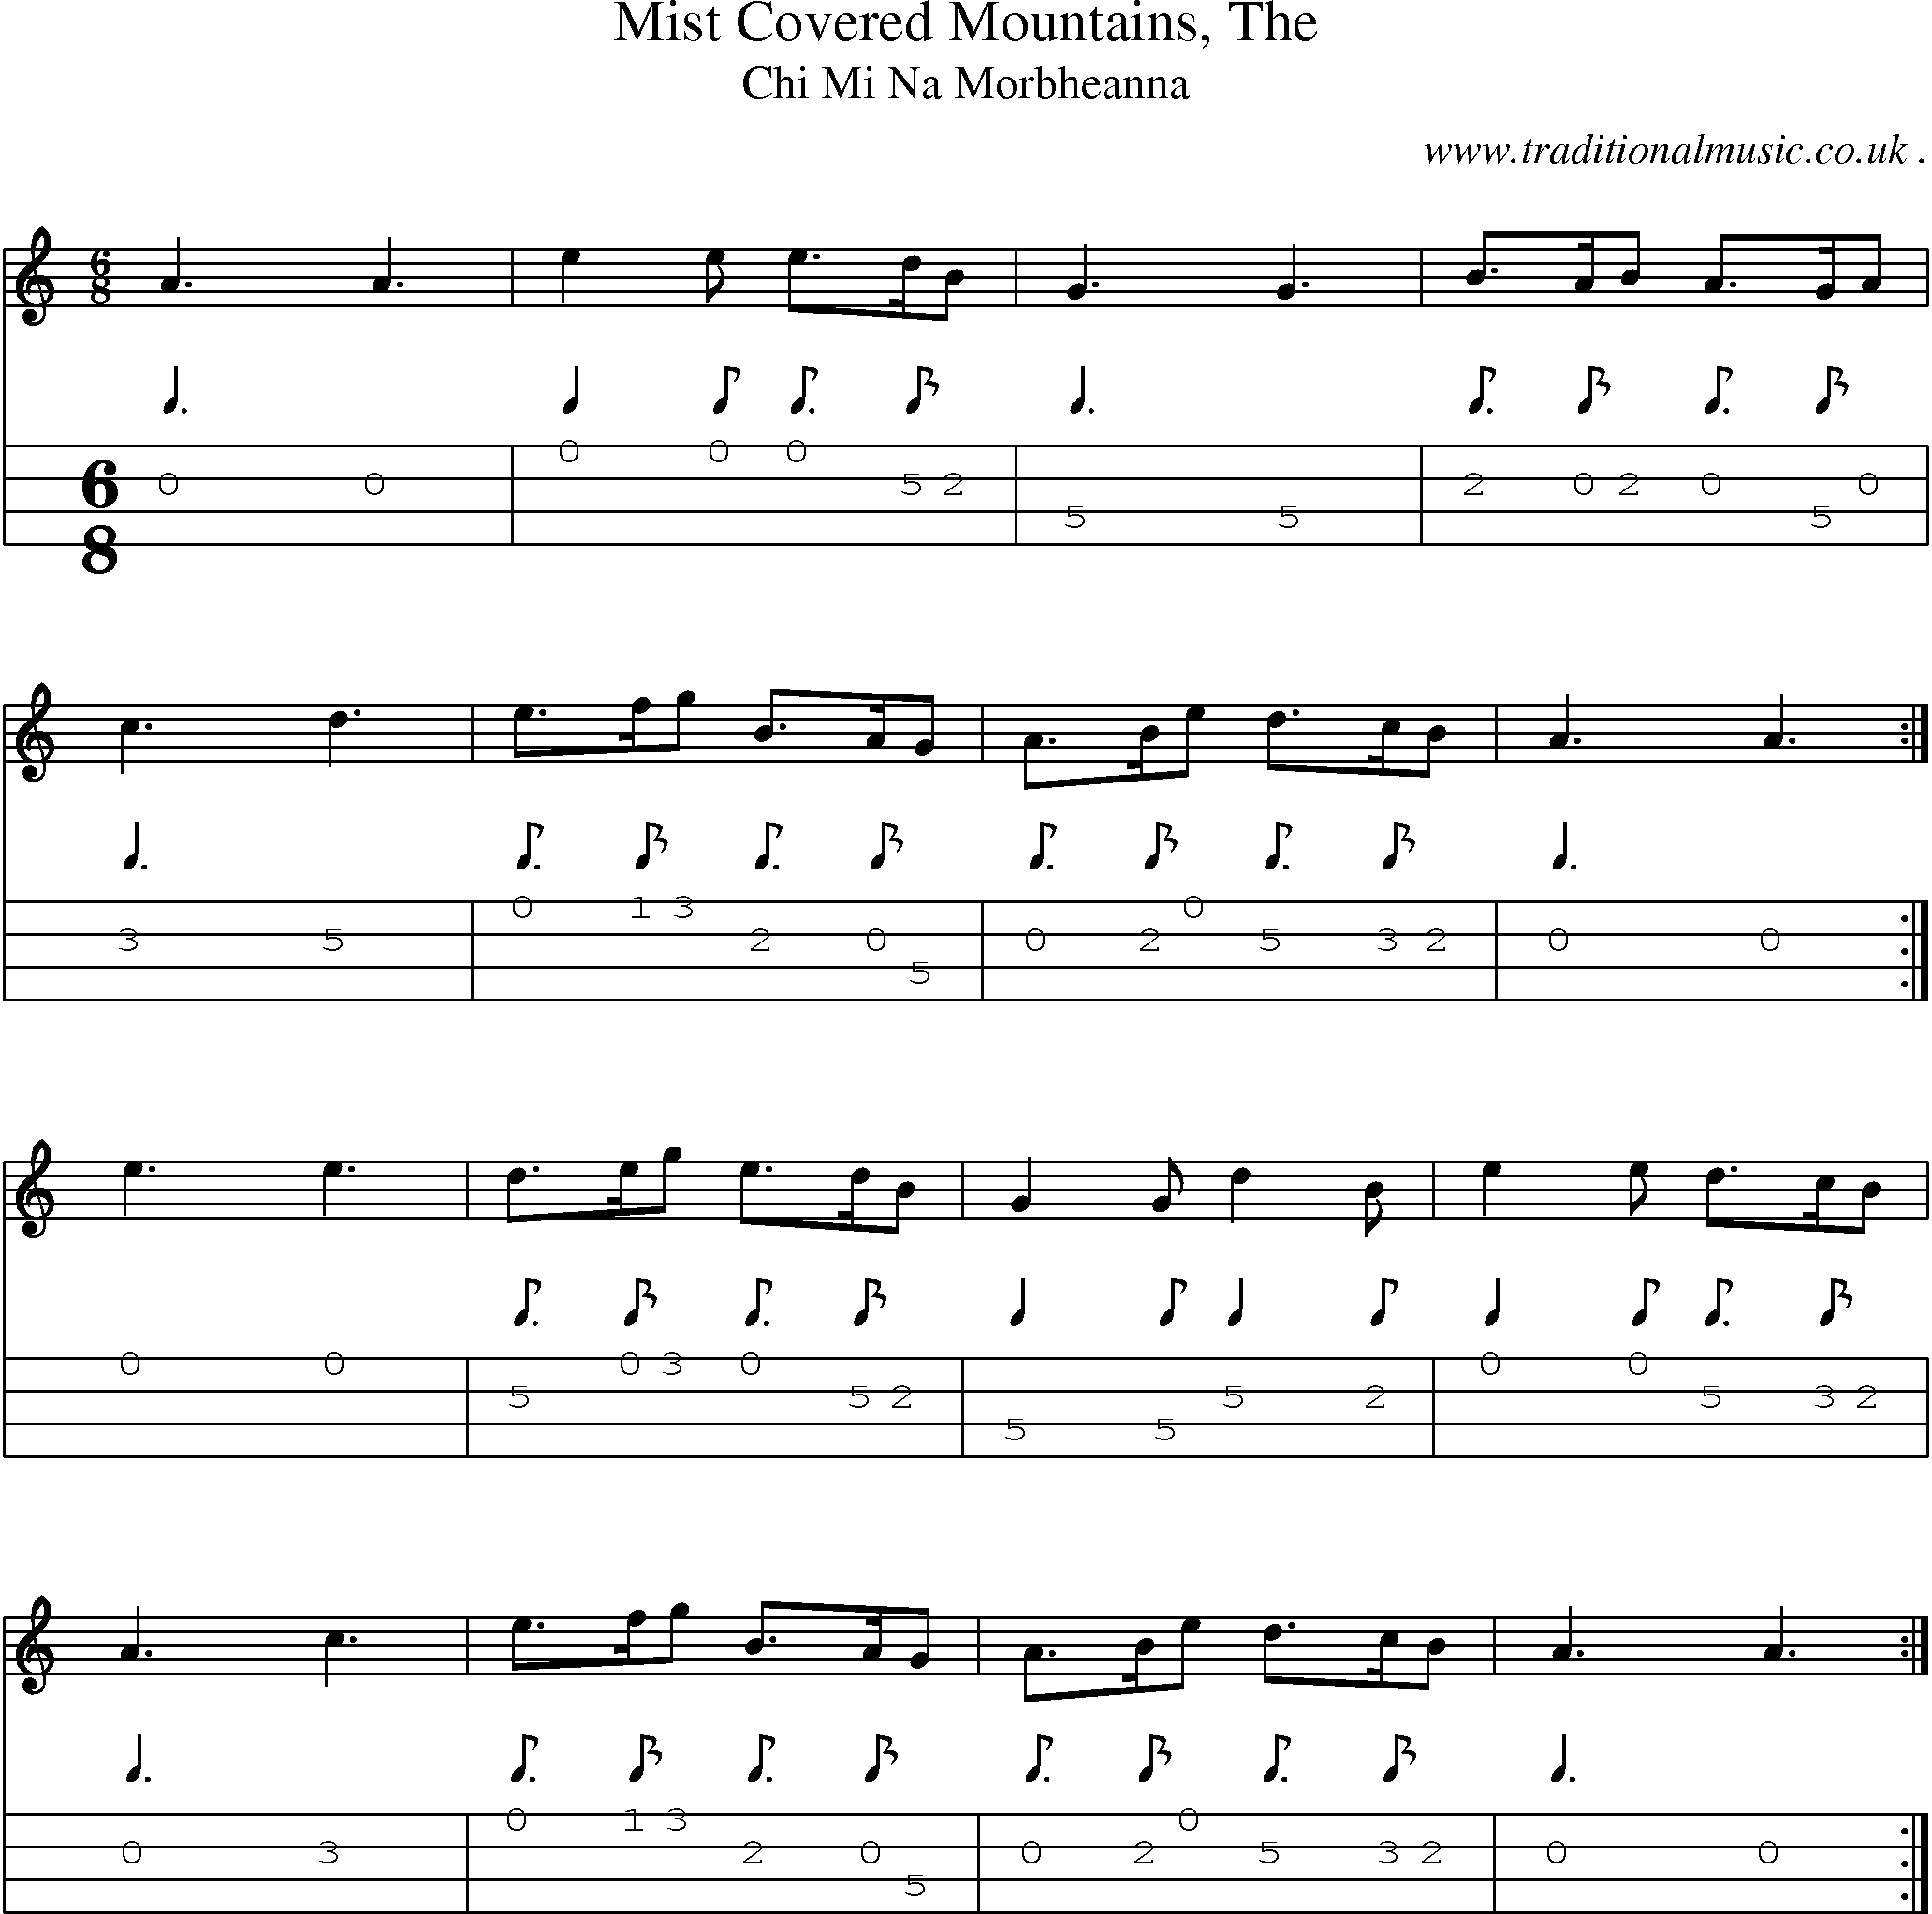 Sheet-music  score, Chords and Mandolin Tabs for Mist Covered Mountains The